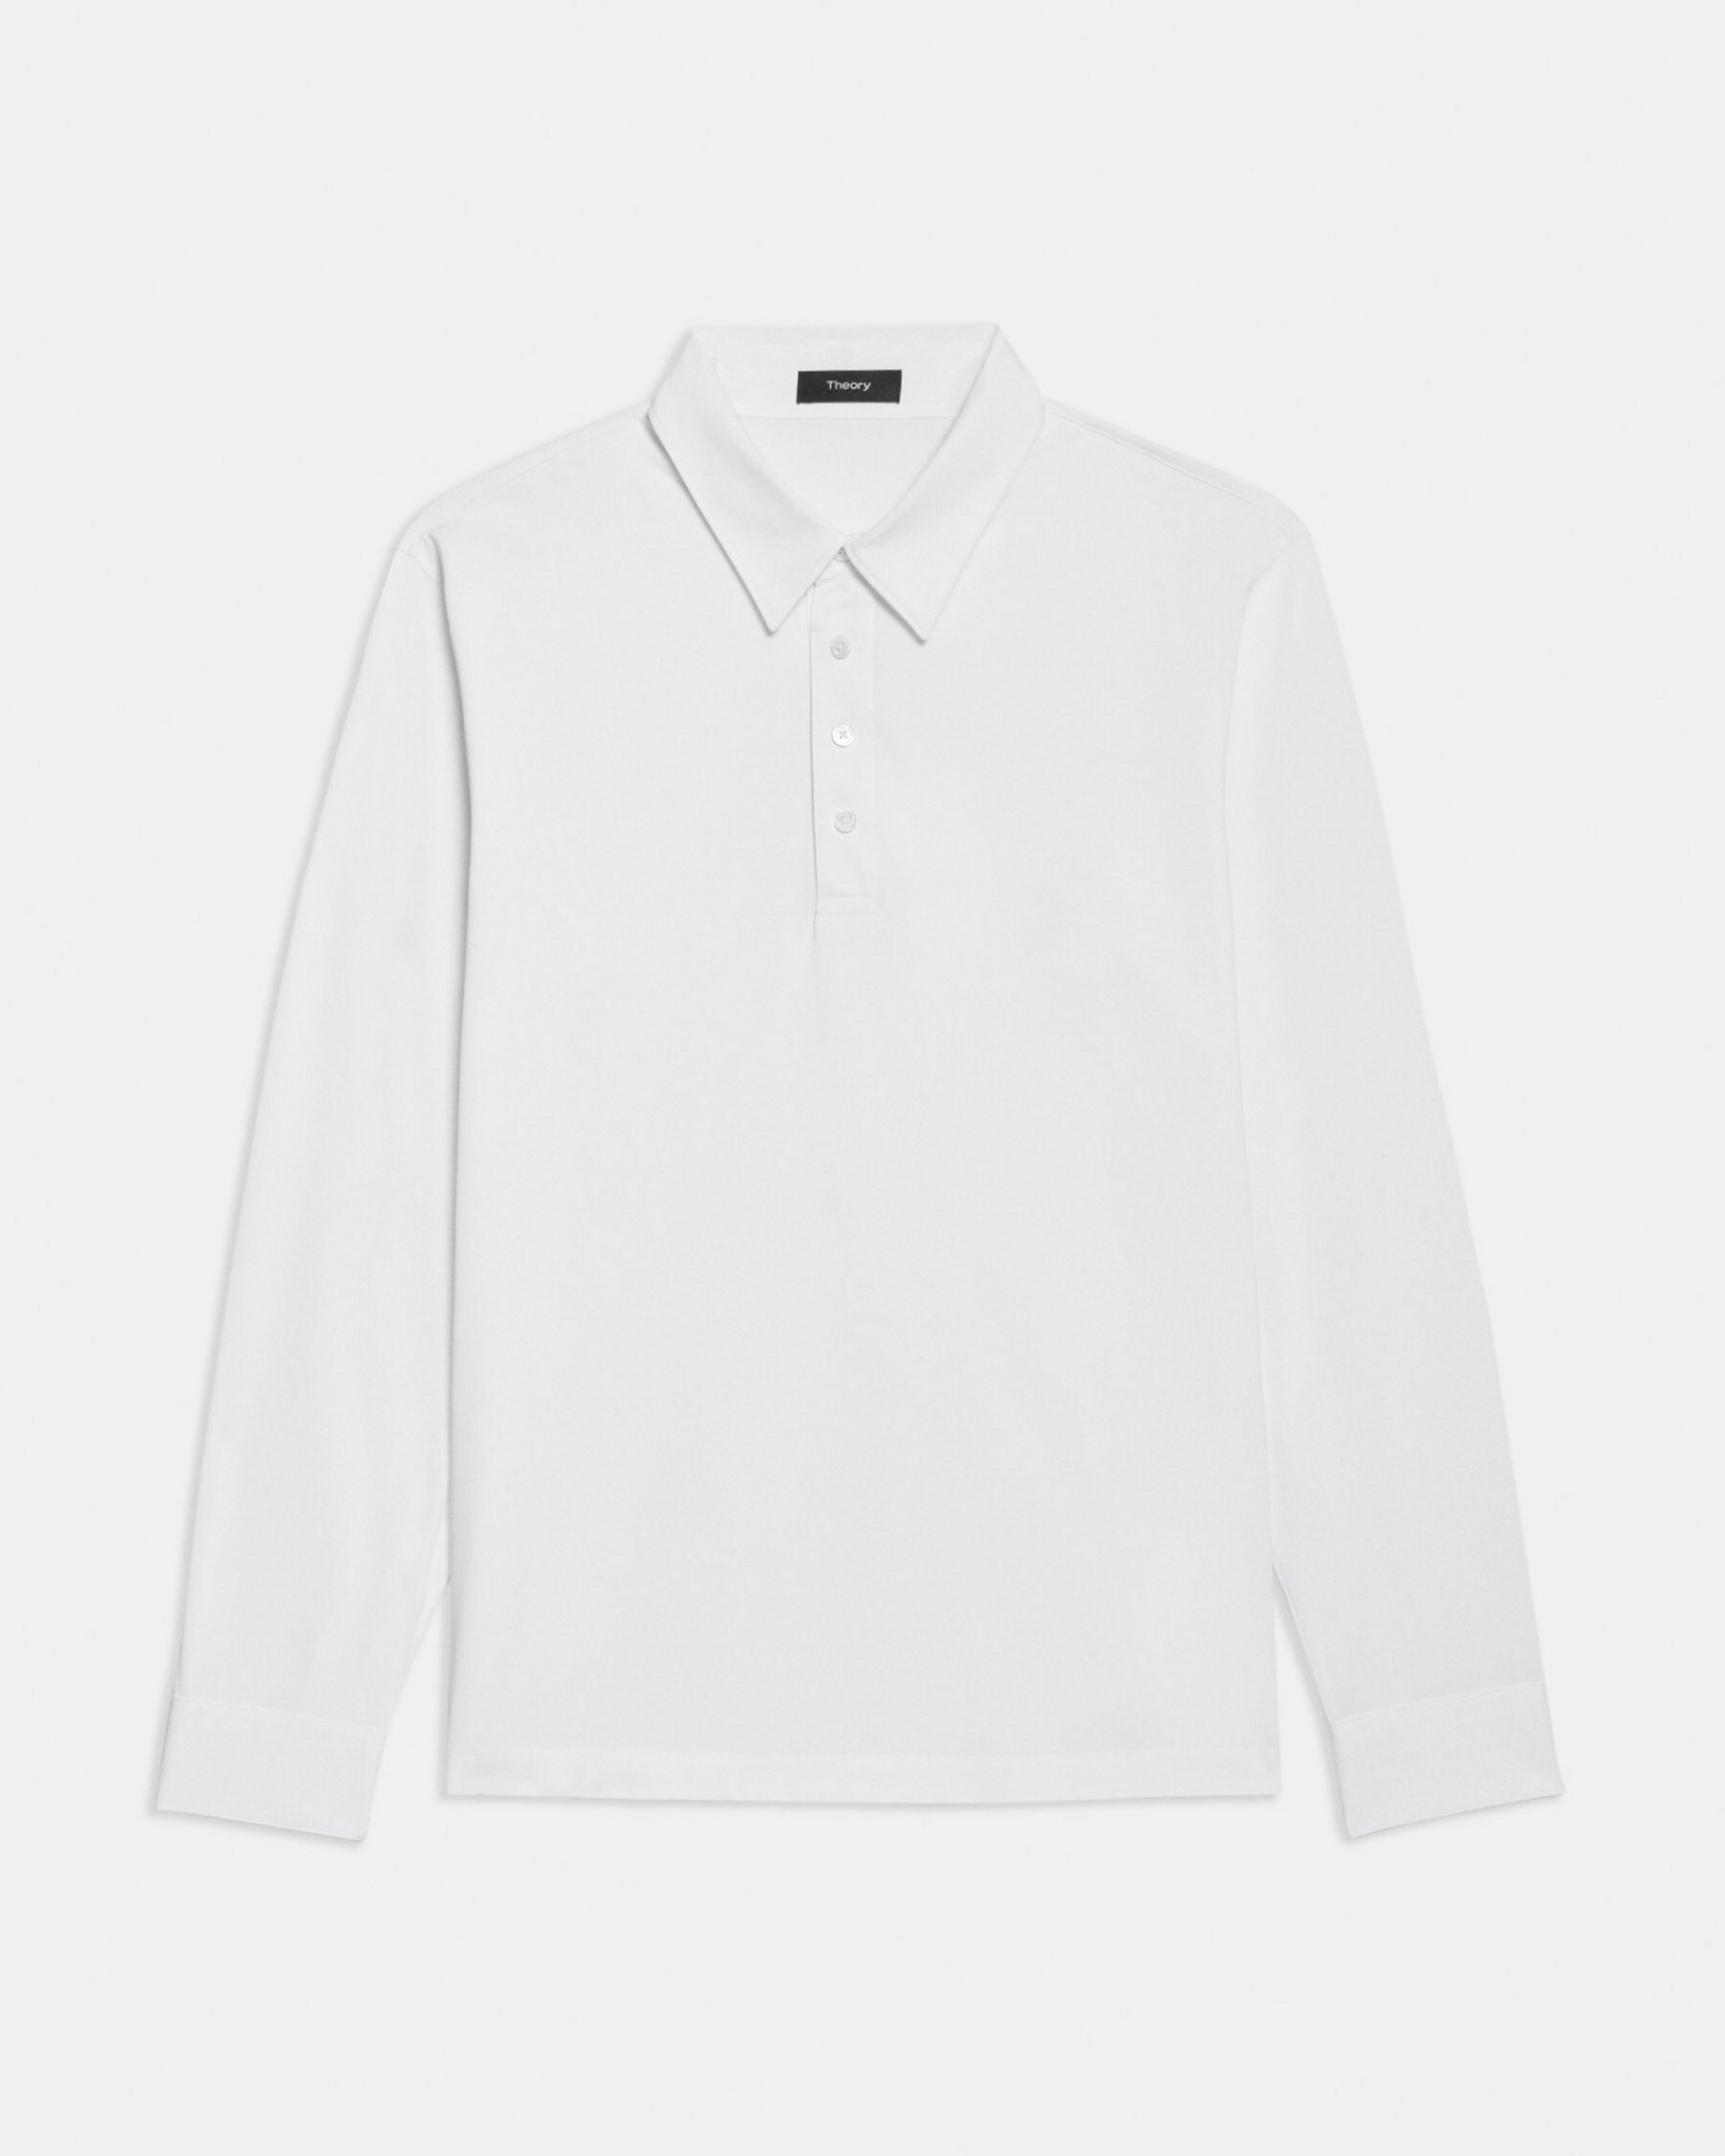 Ronan Long-Sleeve Polo in Structure Knit